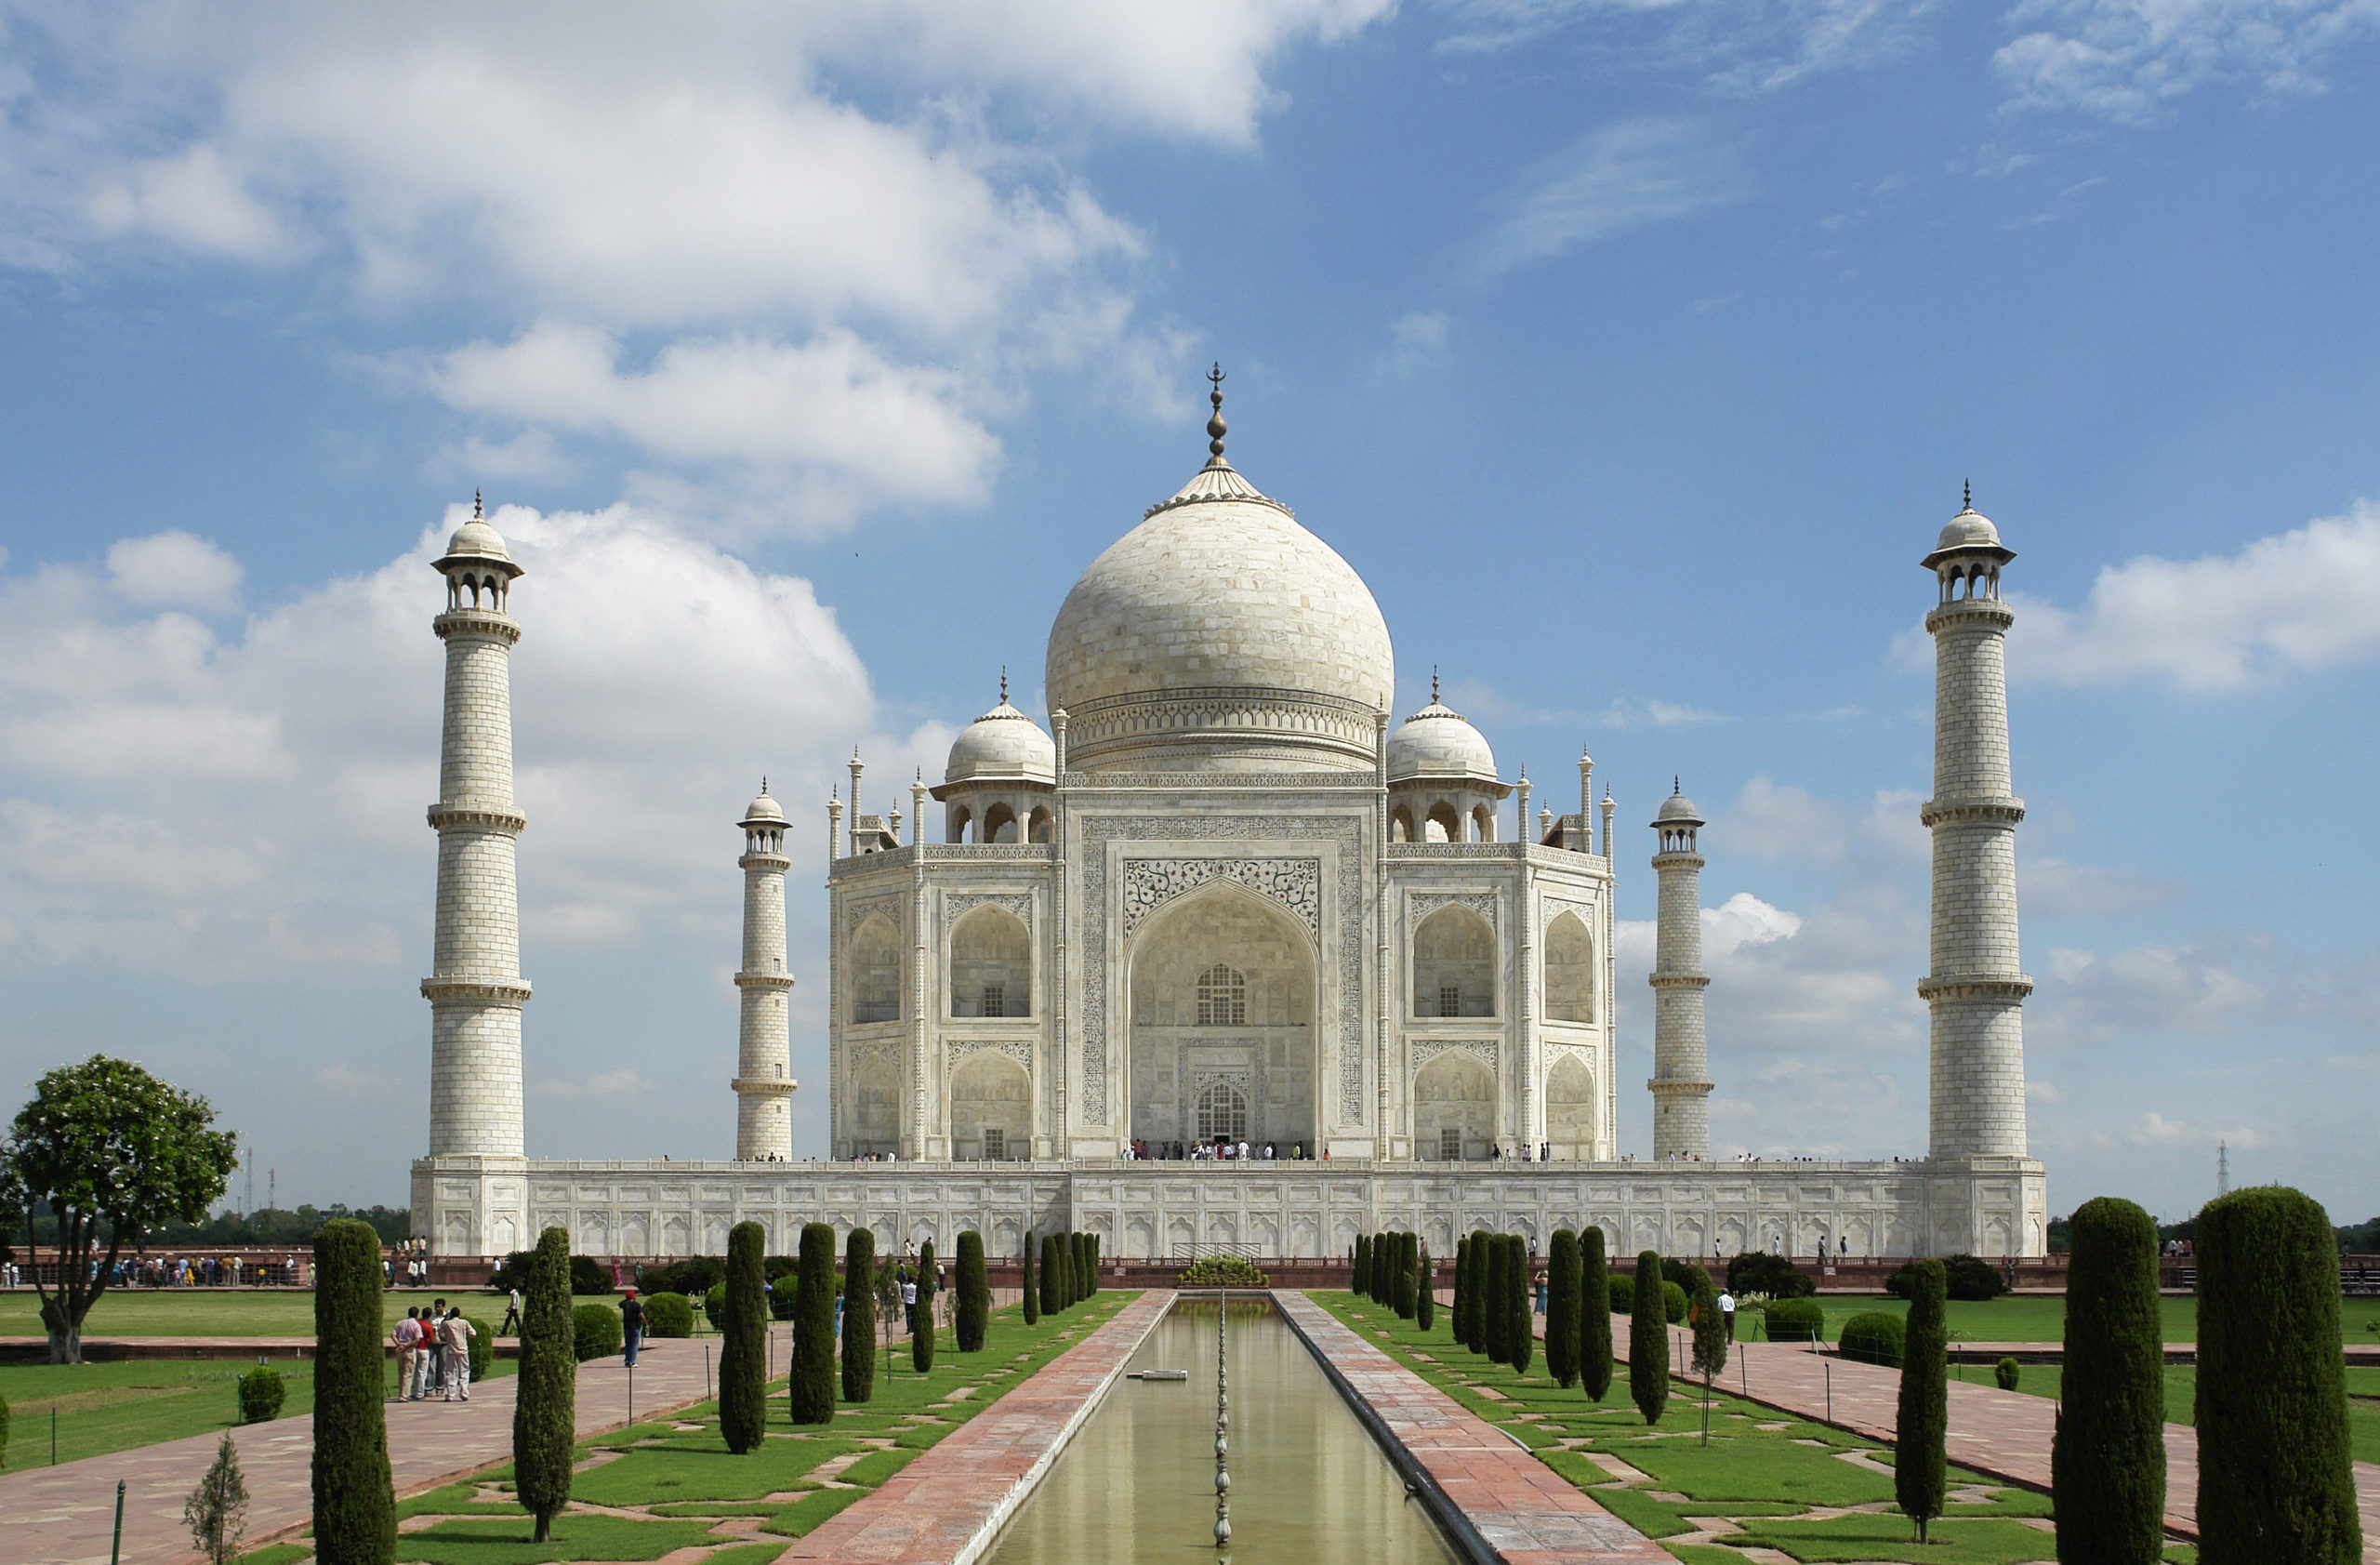 What better way to immortalize your love for each other than by admiring the embodiment of eternal love, Taj Mahal? Add to that the Mughal grandeur and say hello to a “Shahi” Honeymoon. Best Experience – Taj Mahal and Ancient Forts, Luxury resort, Mughals history Best Time Duration – 3 to 5 days Best Time for Visit – October to February